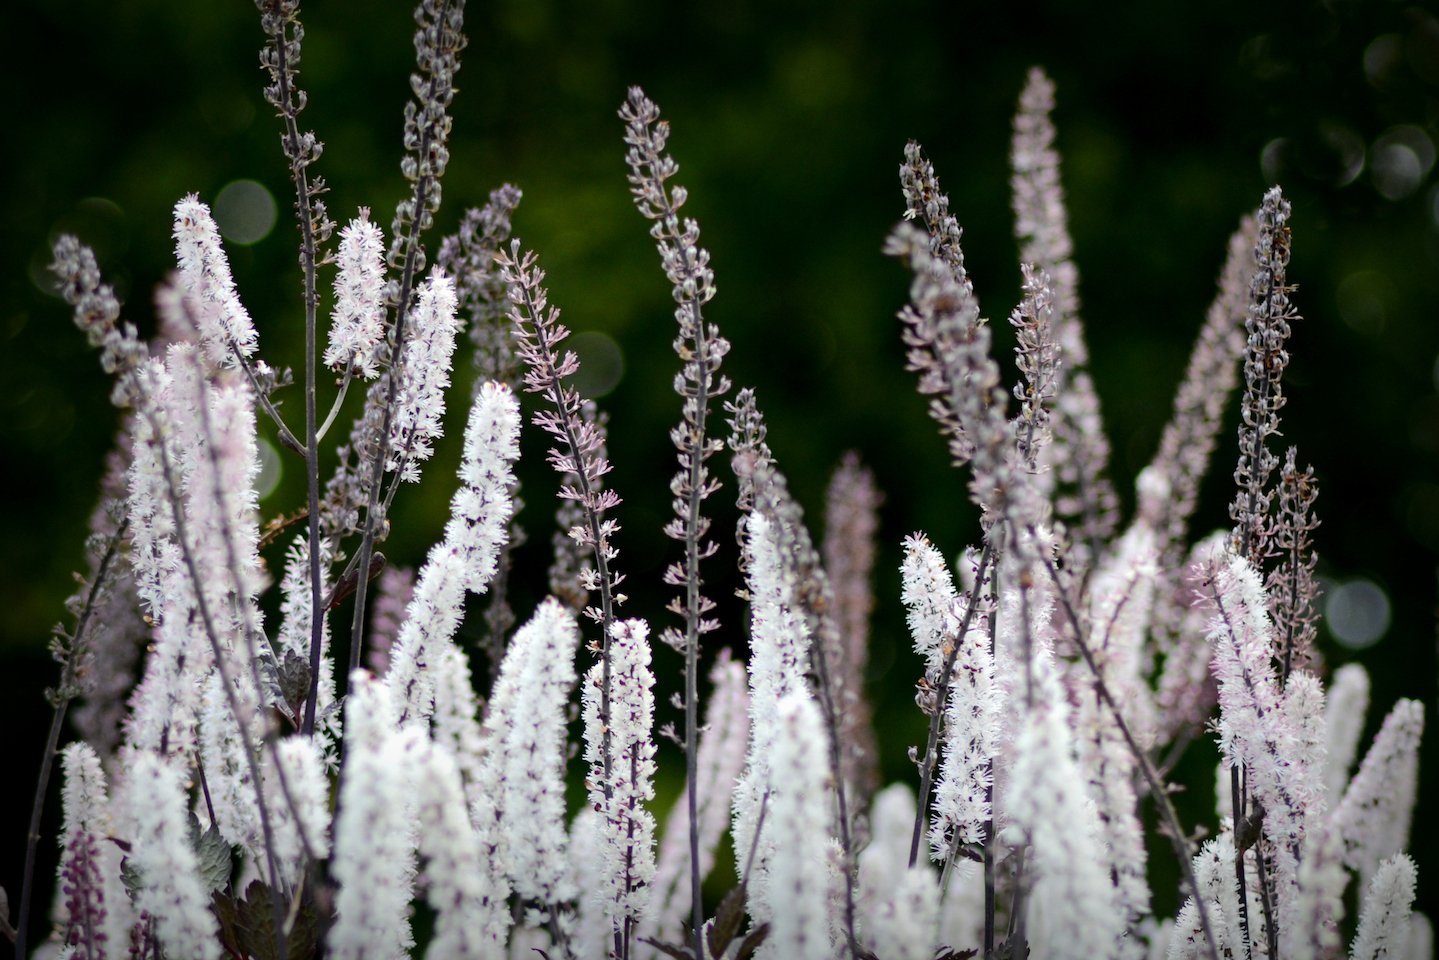 Light violet and white tall plumey flower plants